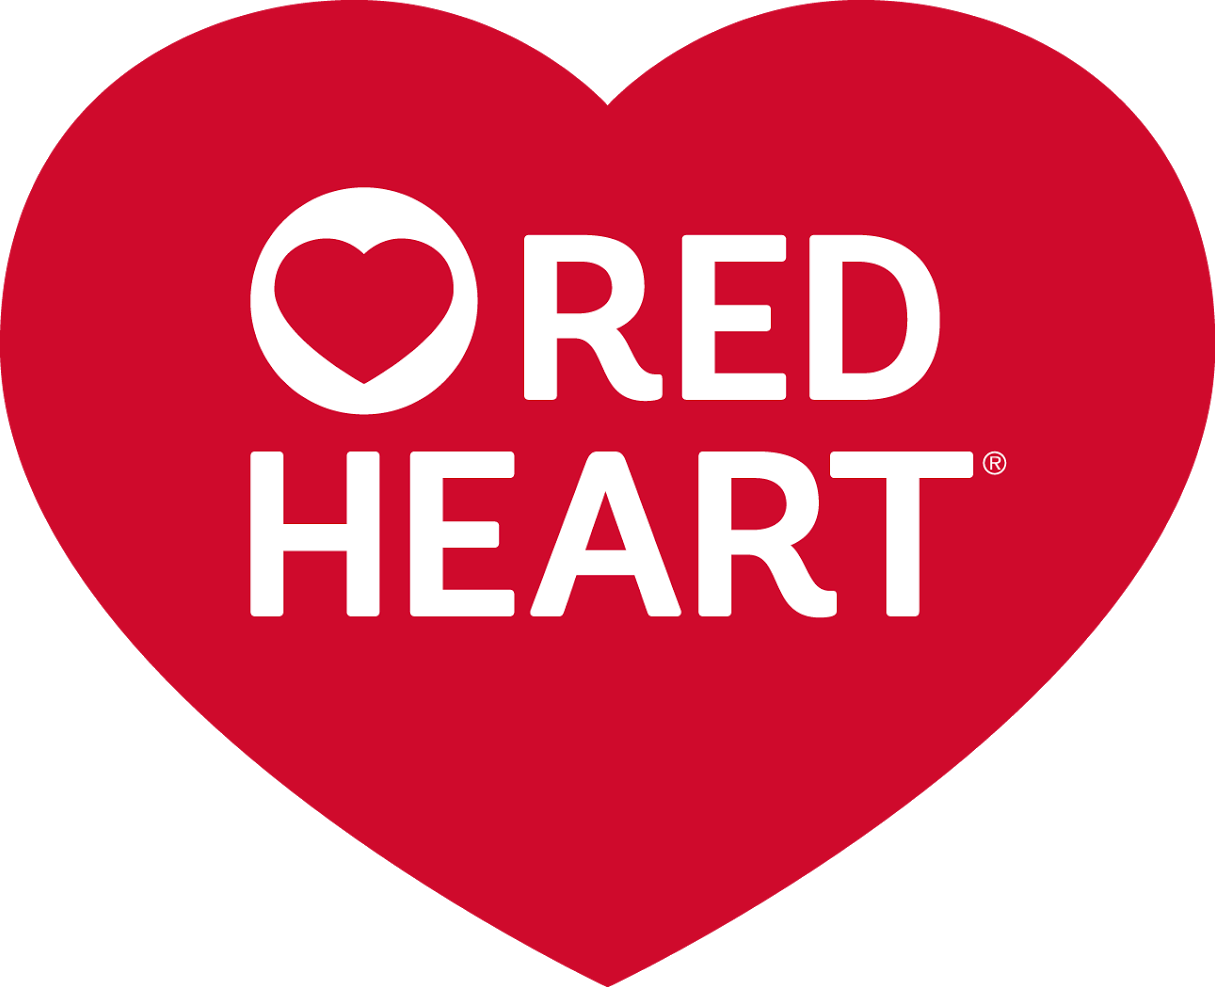 Red Heart is a prize sponsor in this year's Fall into Christmas #crochet #contest hosted by @beckastreasures with @redheartyarns!